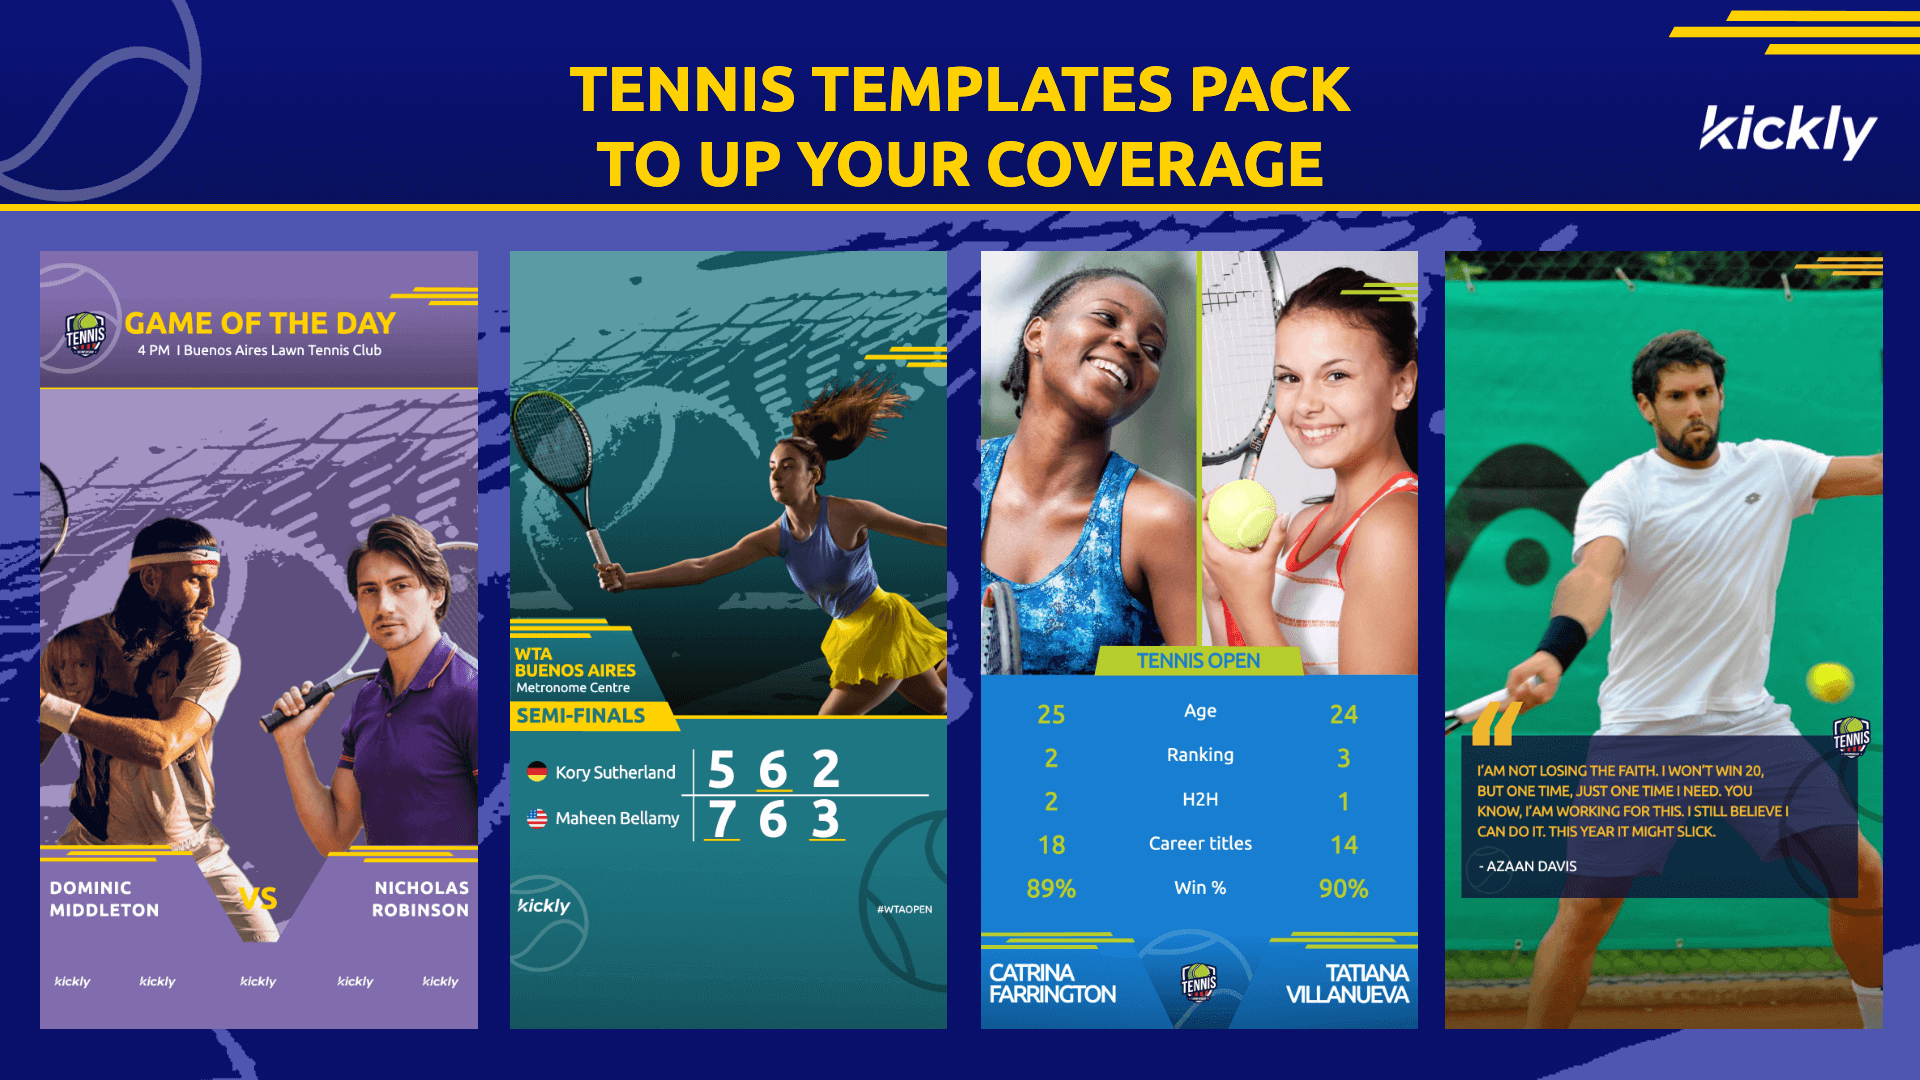 The Perfect Tennis Templates to Score your Game, Set, and Match